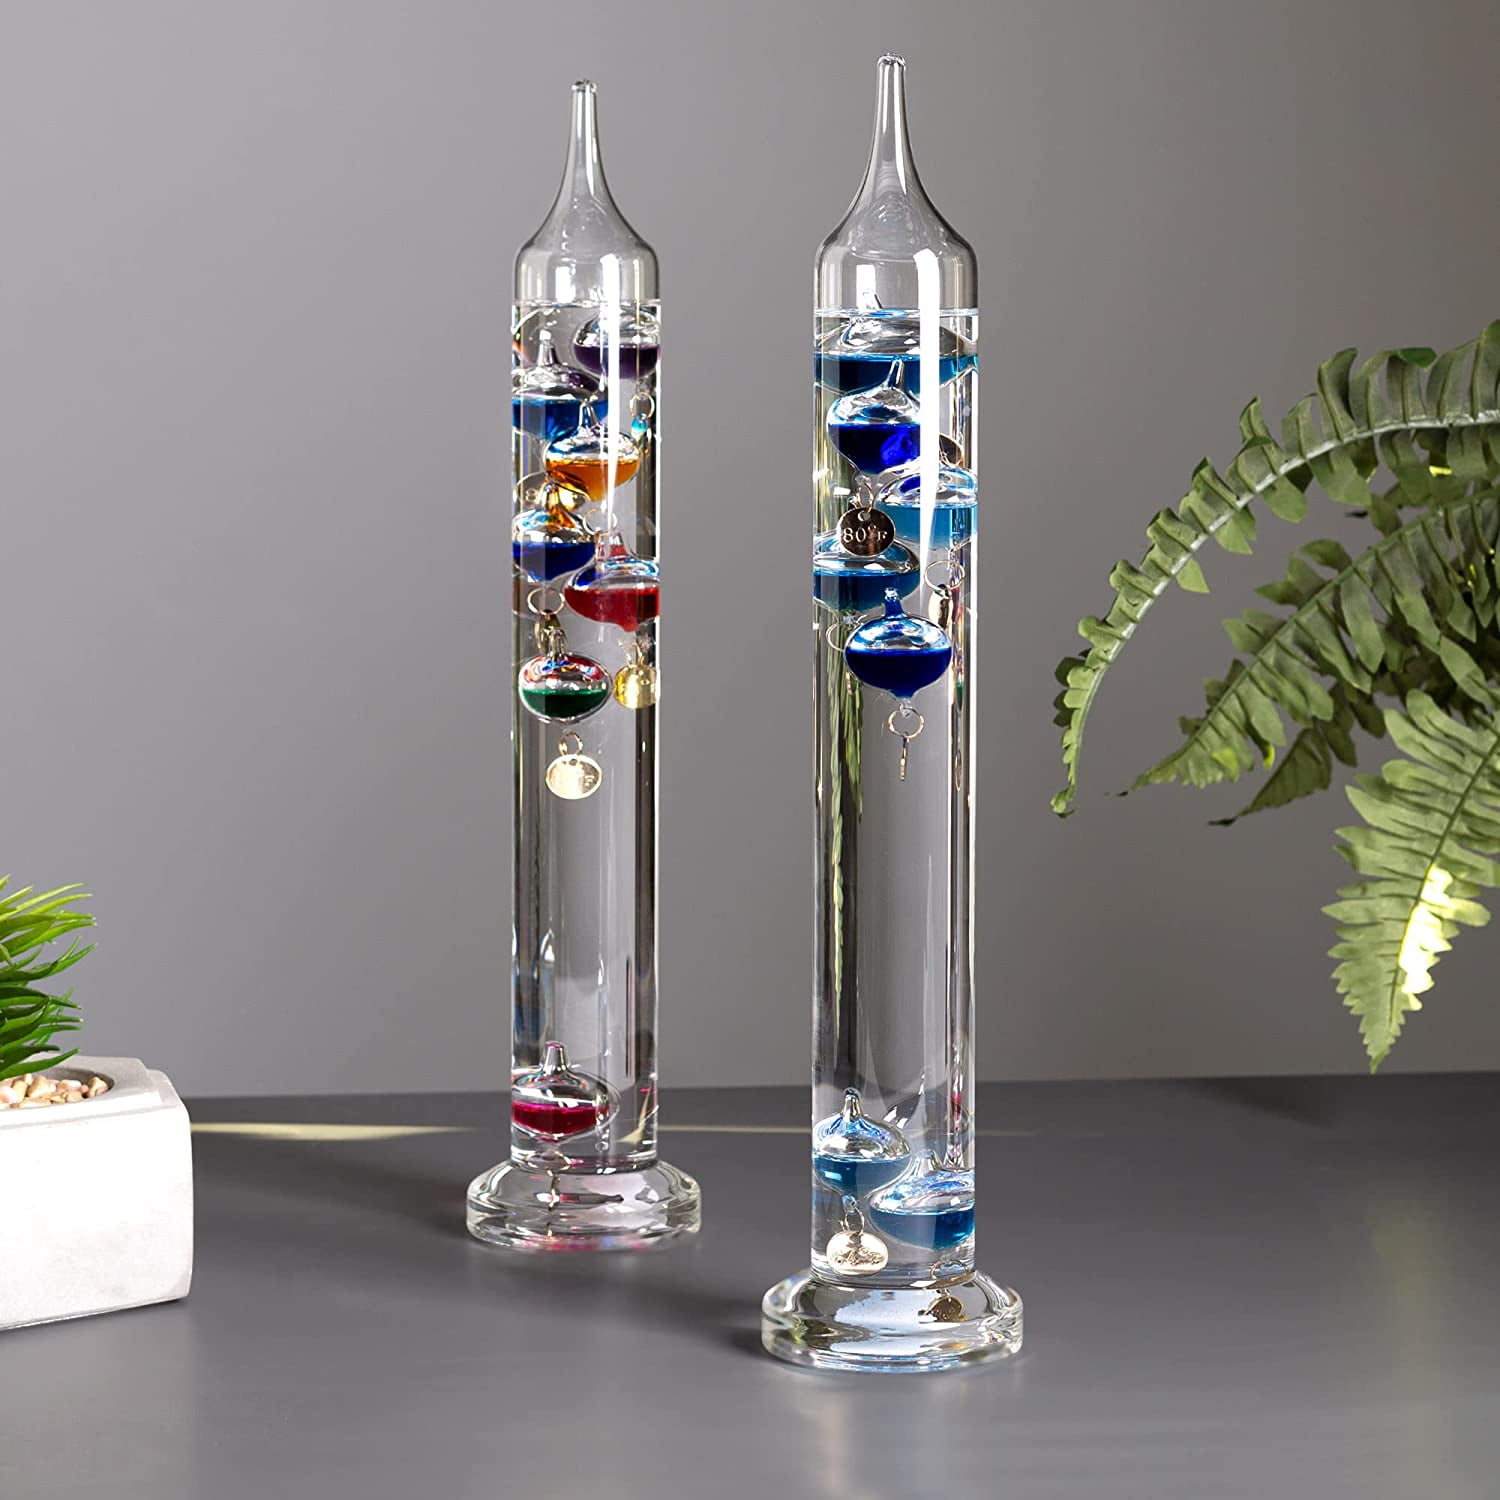 Shop LC Galileo Thermometer Indoor and Outdoor Temperature with Blue  Floating Balls in a Glass Tube - Ideal Weather Predictor for Office Home  Desk 